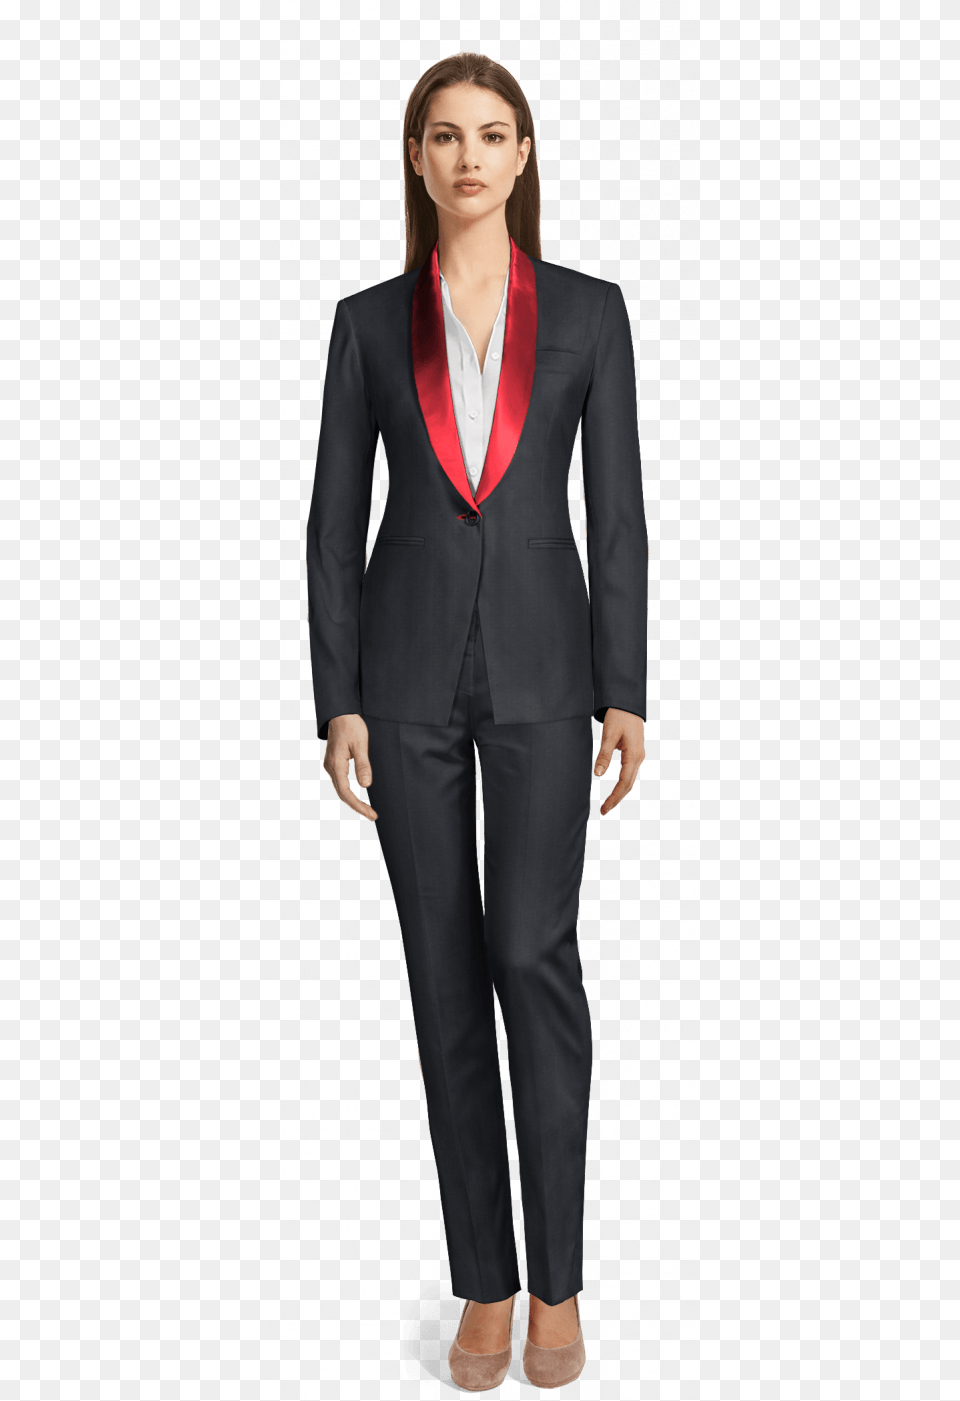 Navy Blue Shiny Tuxedo With Shawl Lapels Whole Body Formal Attire For Women, Clothing, Formal Wear, Suit, Adult Png